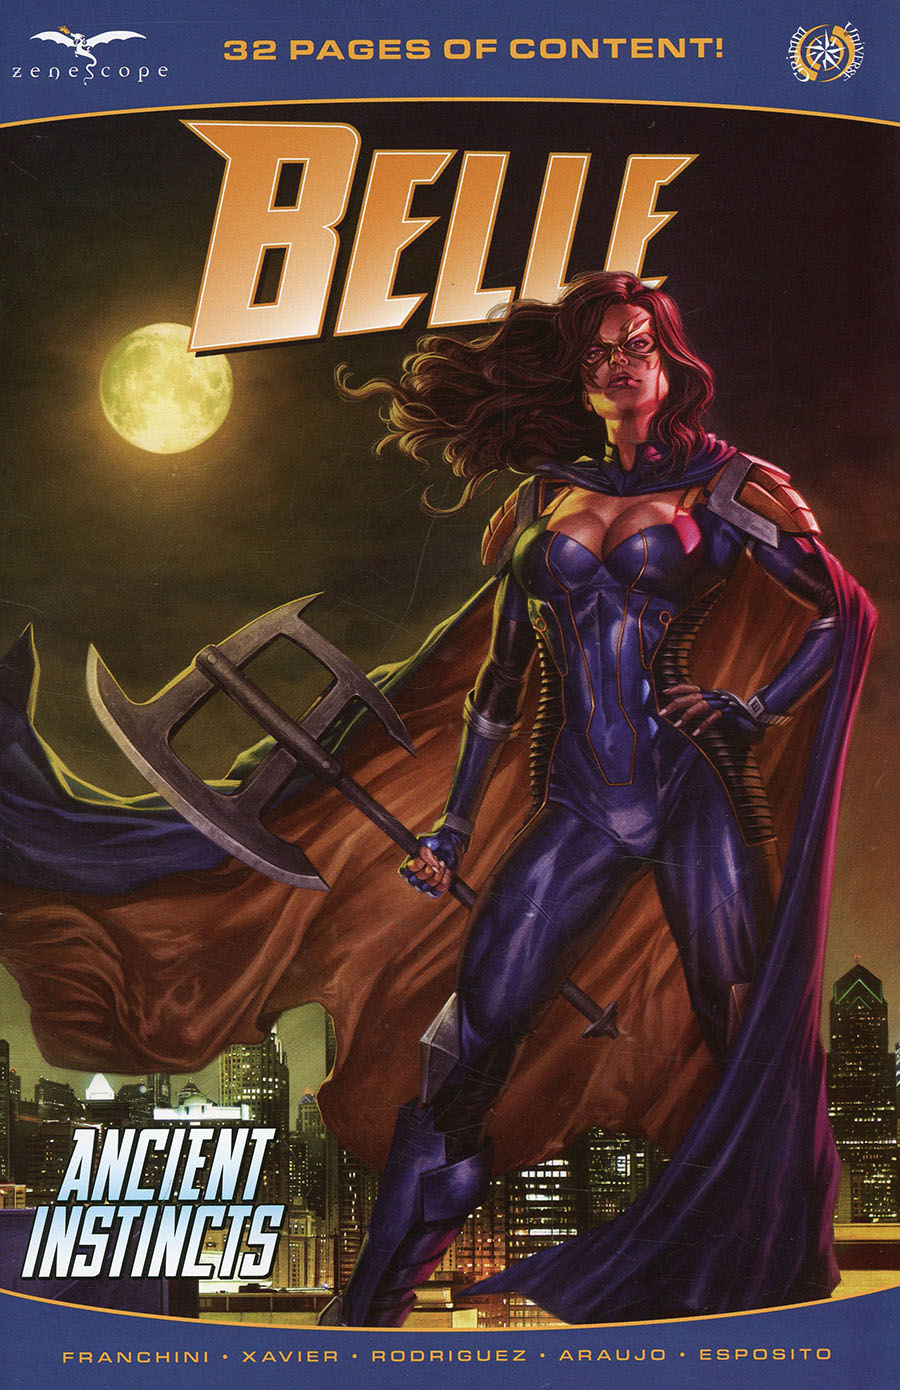 Grimm Fairy Tales Presents Belle Ancient Instincts #1 (One Shot) Cover A Caio Cacau